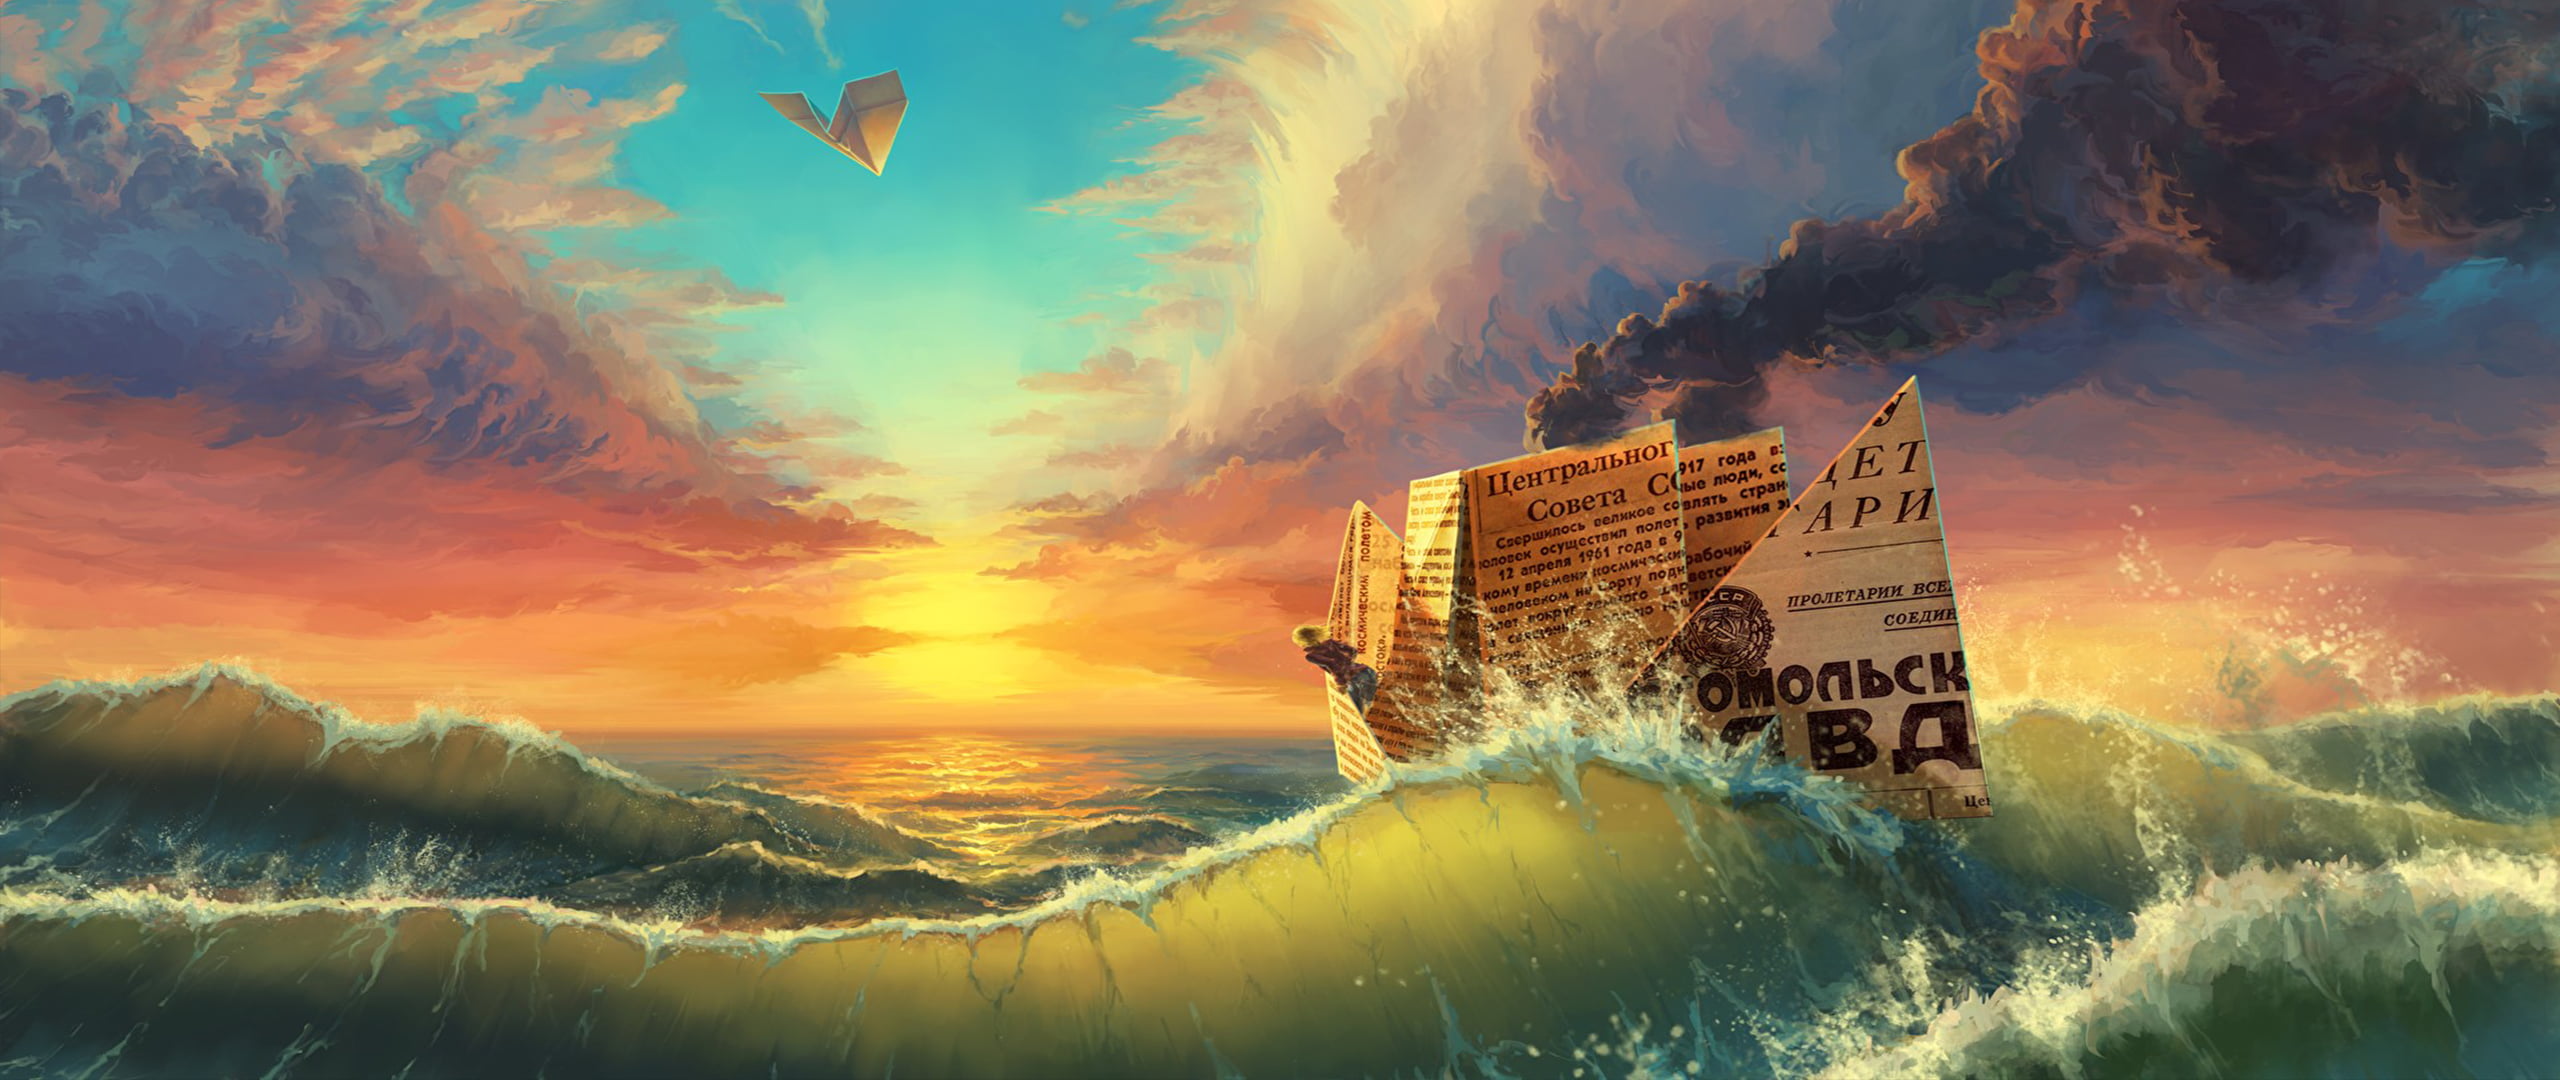 brown and white house near body of water painting, ultra-wide, fantasy art, waves